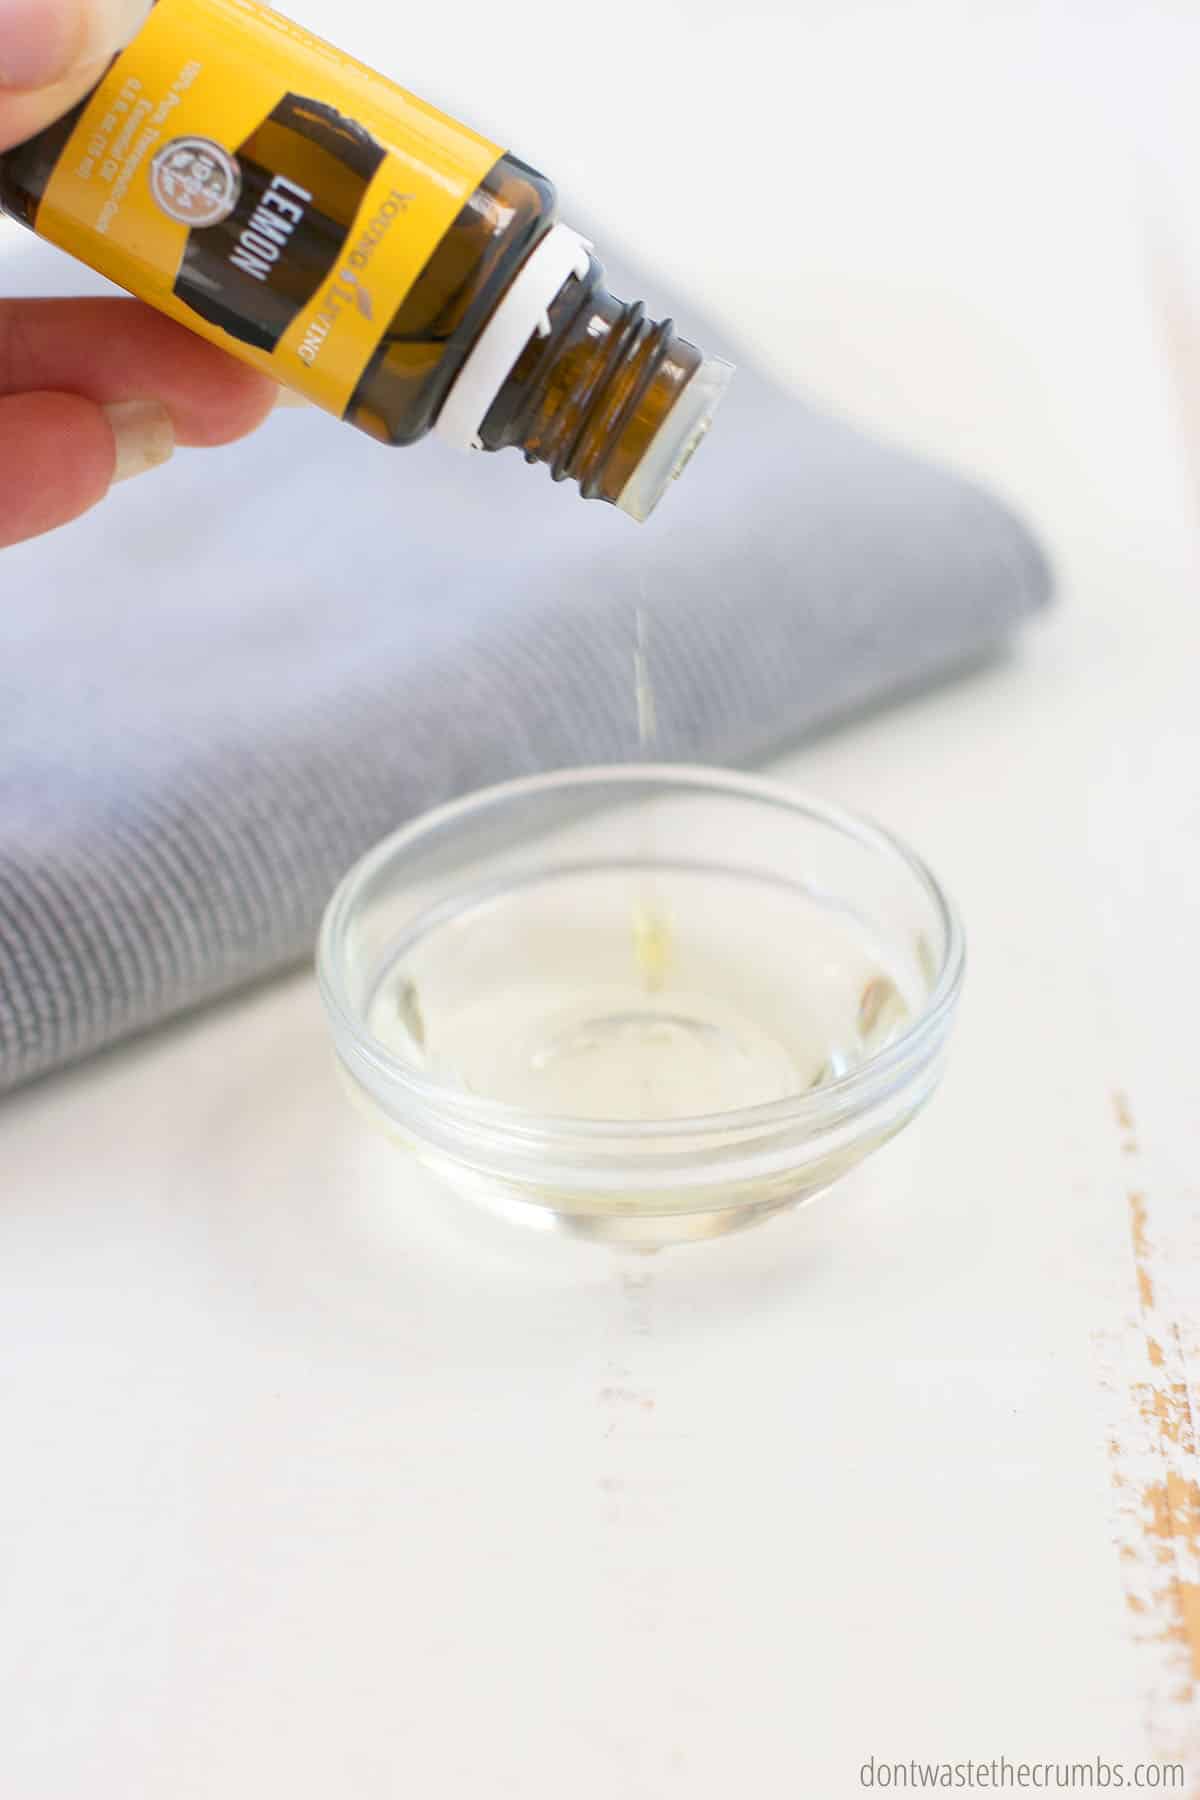 Hand pouring lemon essential oil into a small glass bowl to make wood polish